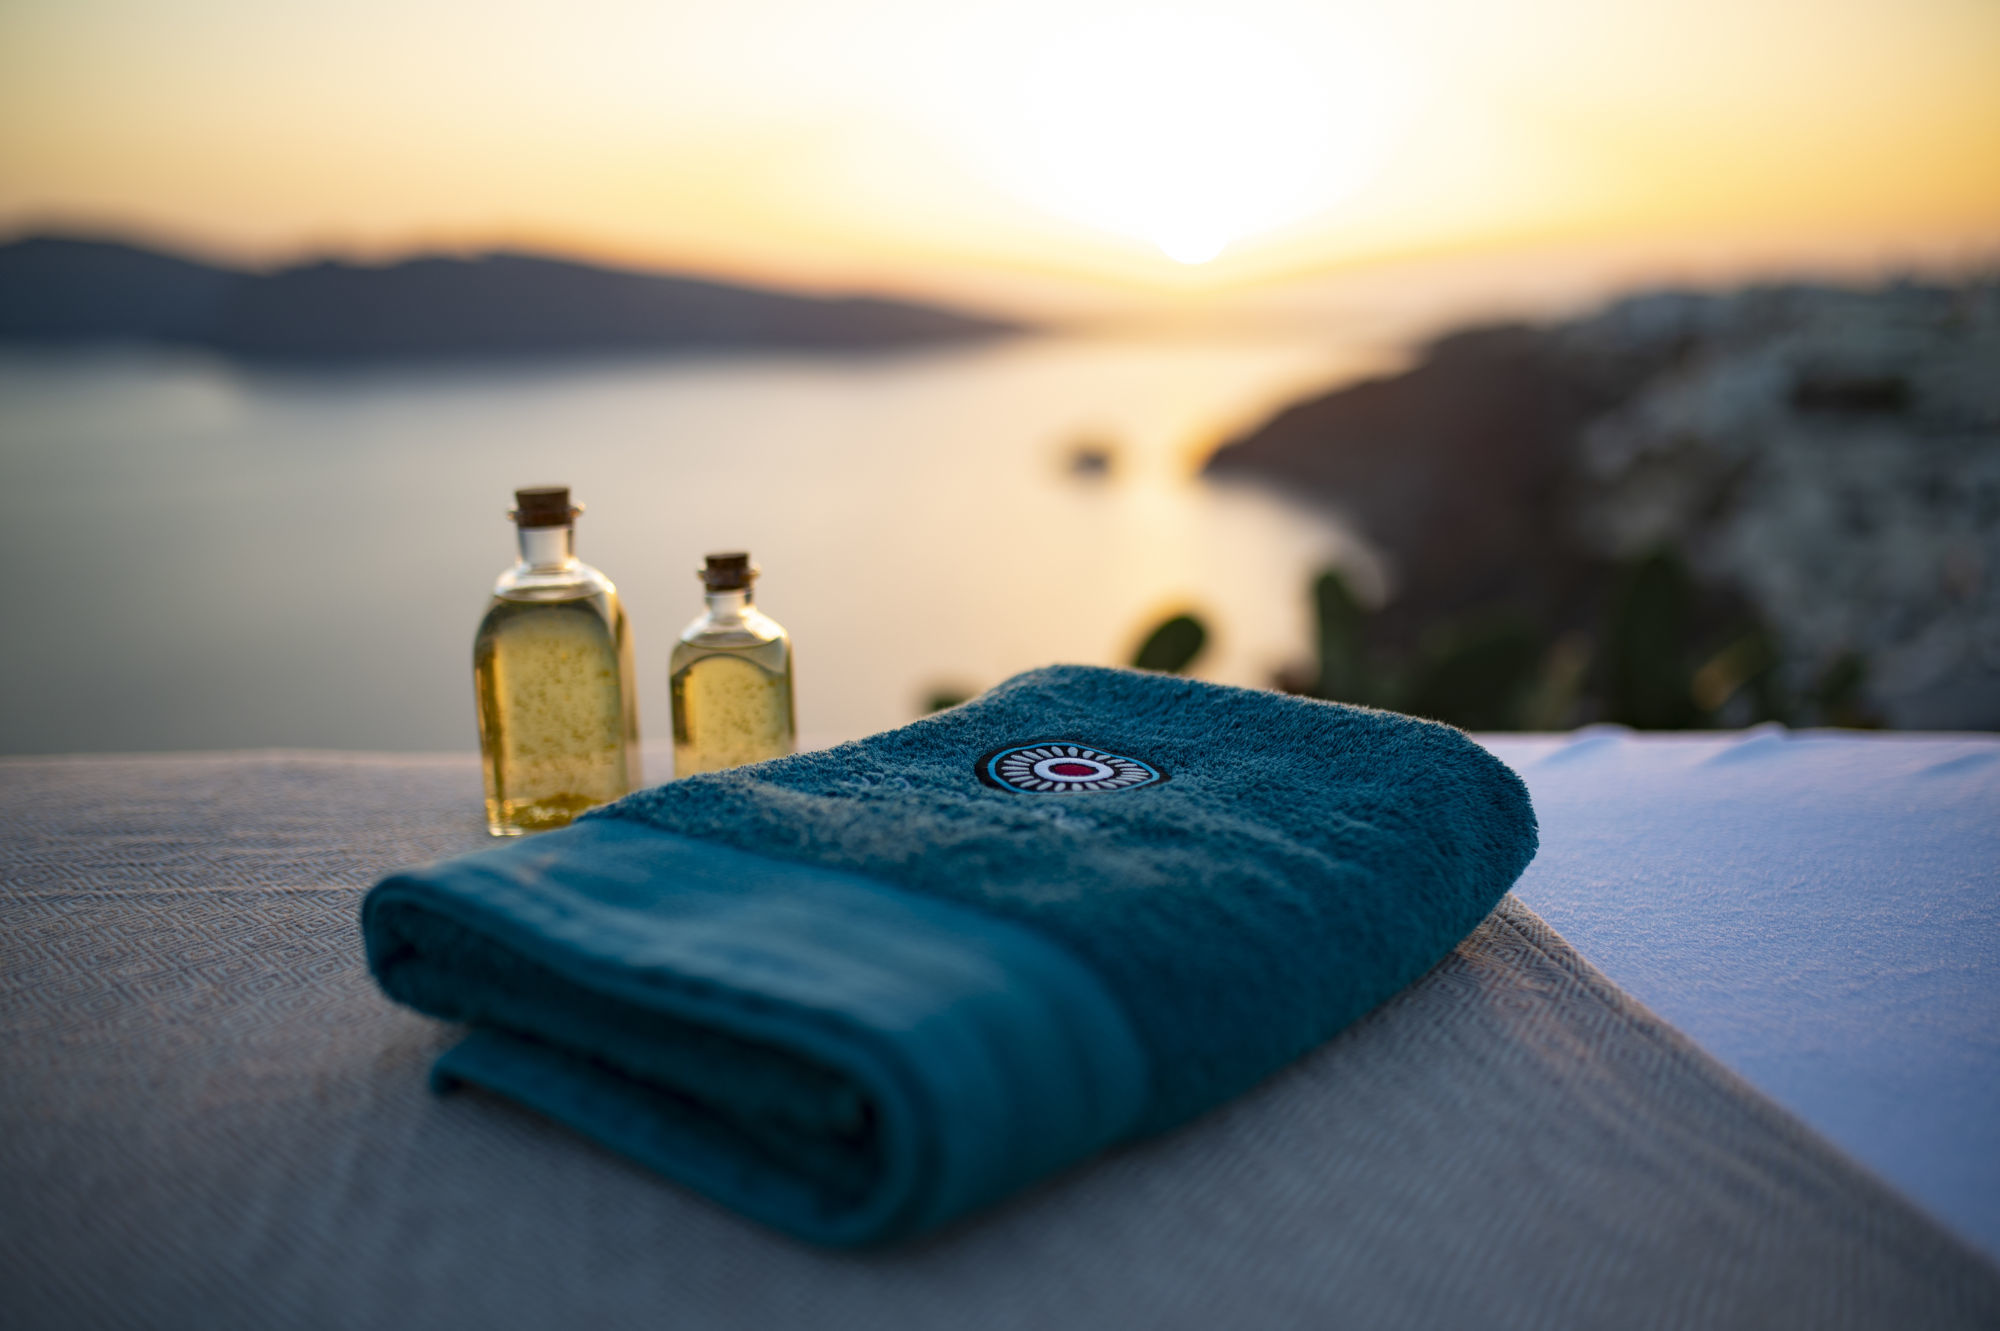 Santorini Mobile Massage: Awaits, with Signature Massage Treatment in Santorini, Oia Sunset in the Background